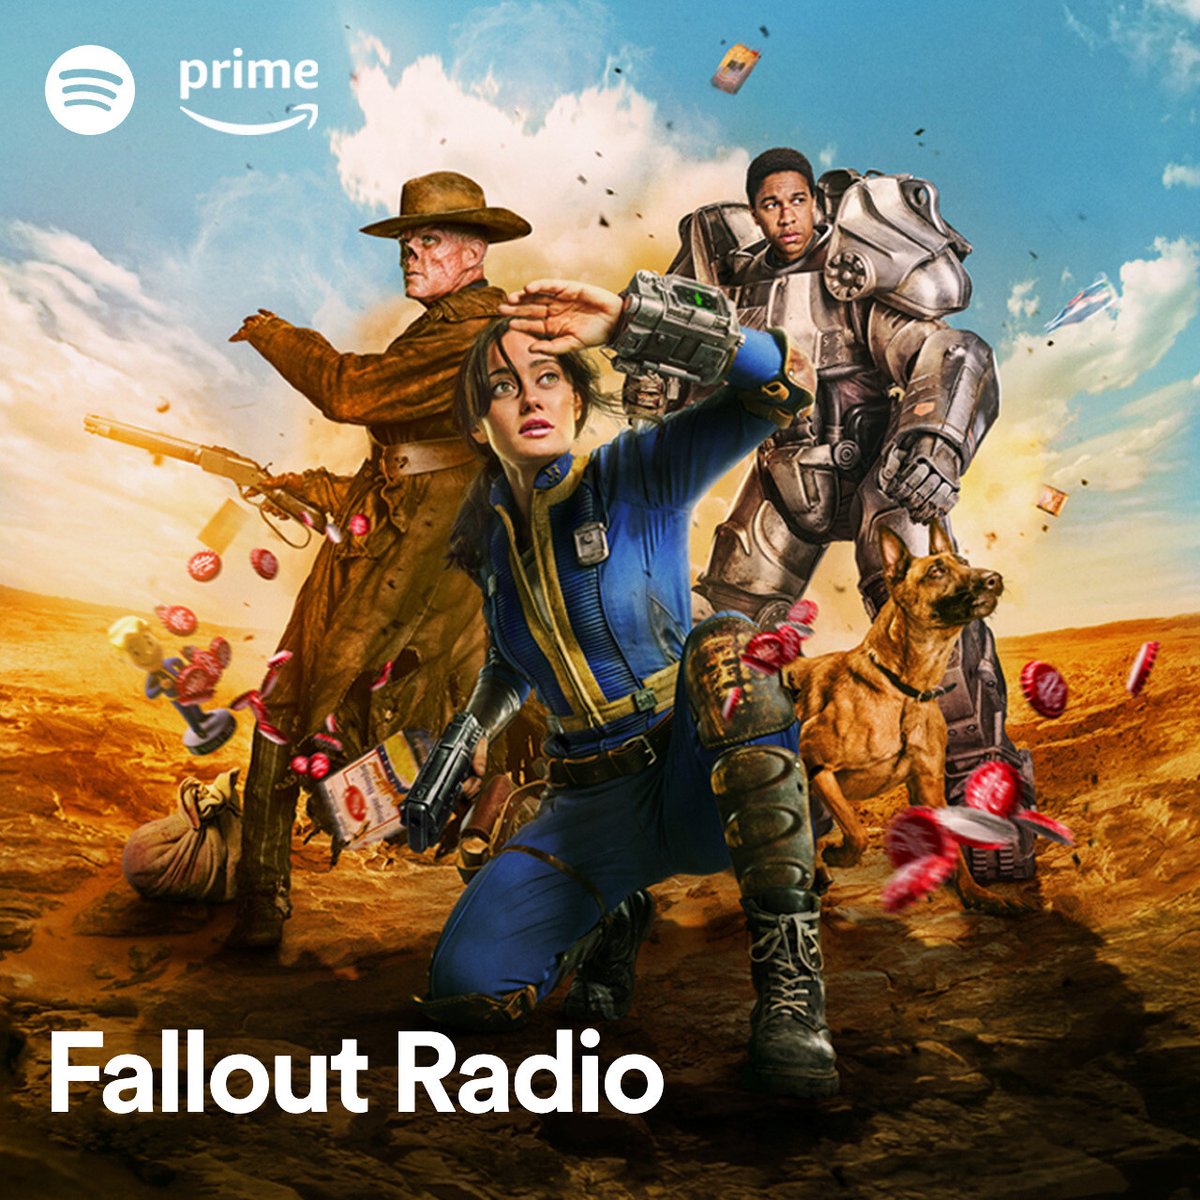 Make your way through the Wasteland and listen to Fallout Radio on Spotify featuring music from the series: spotify.link/fallout